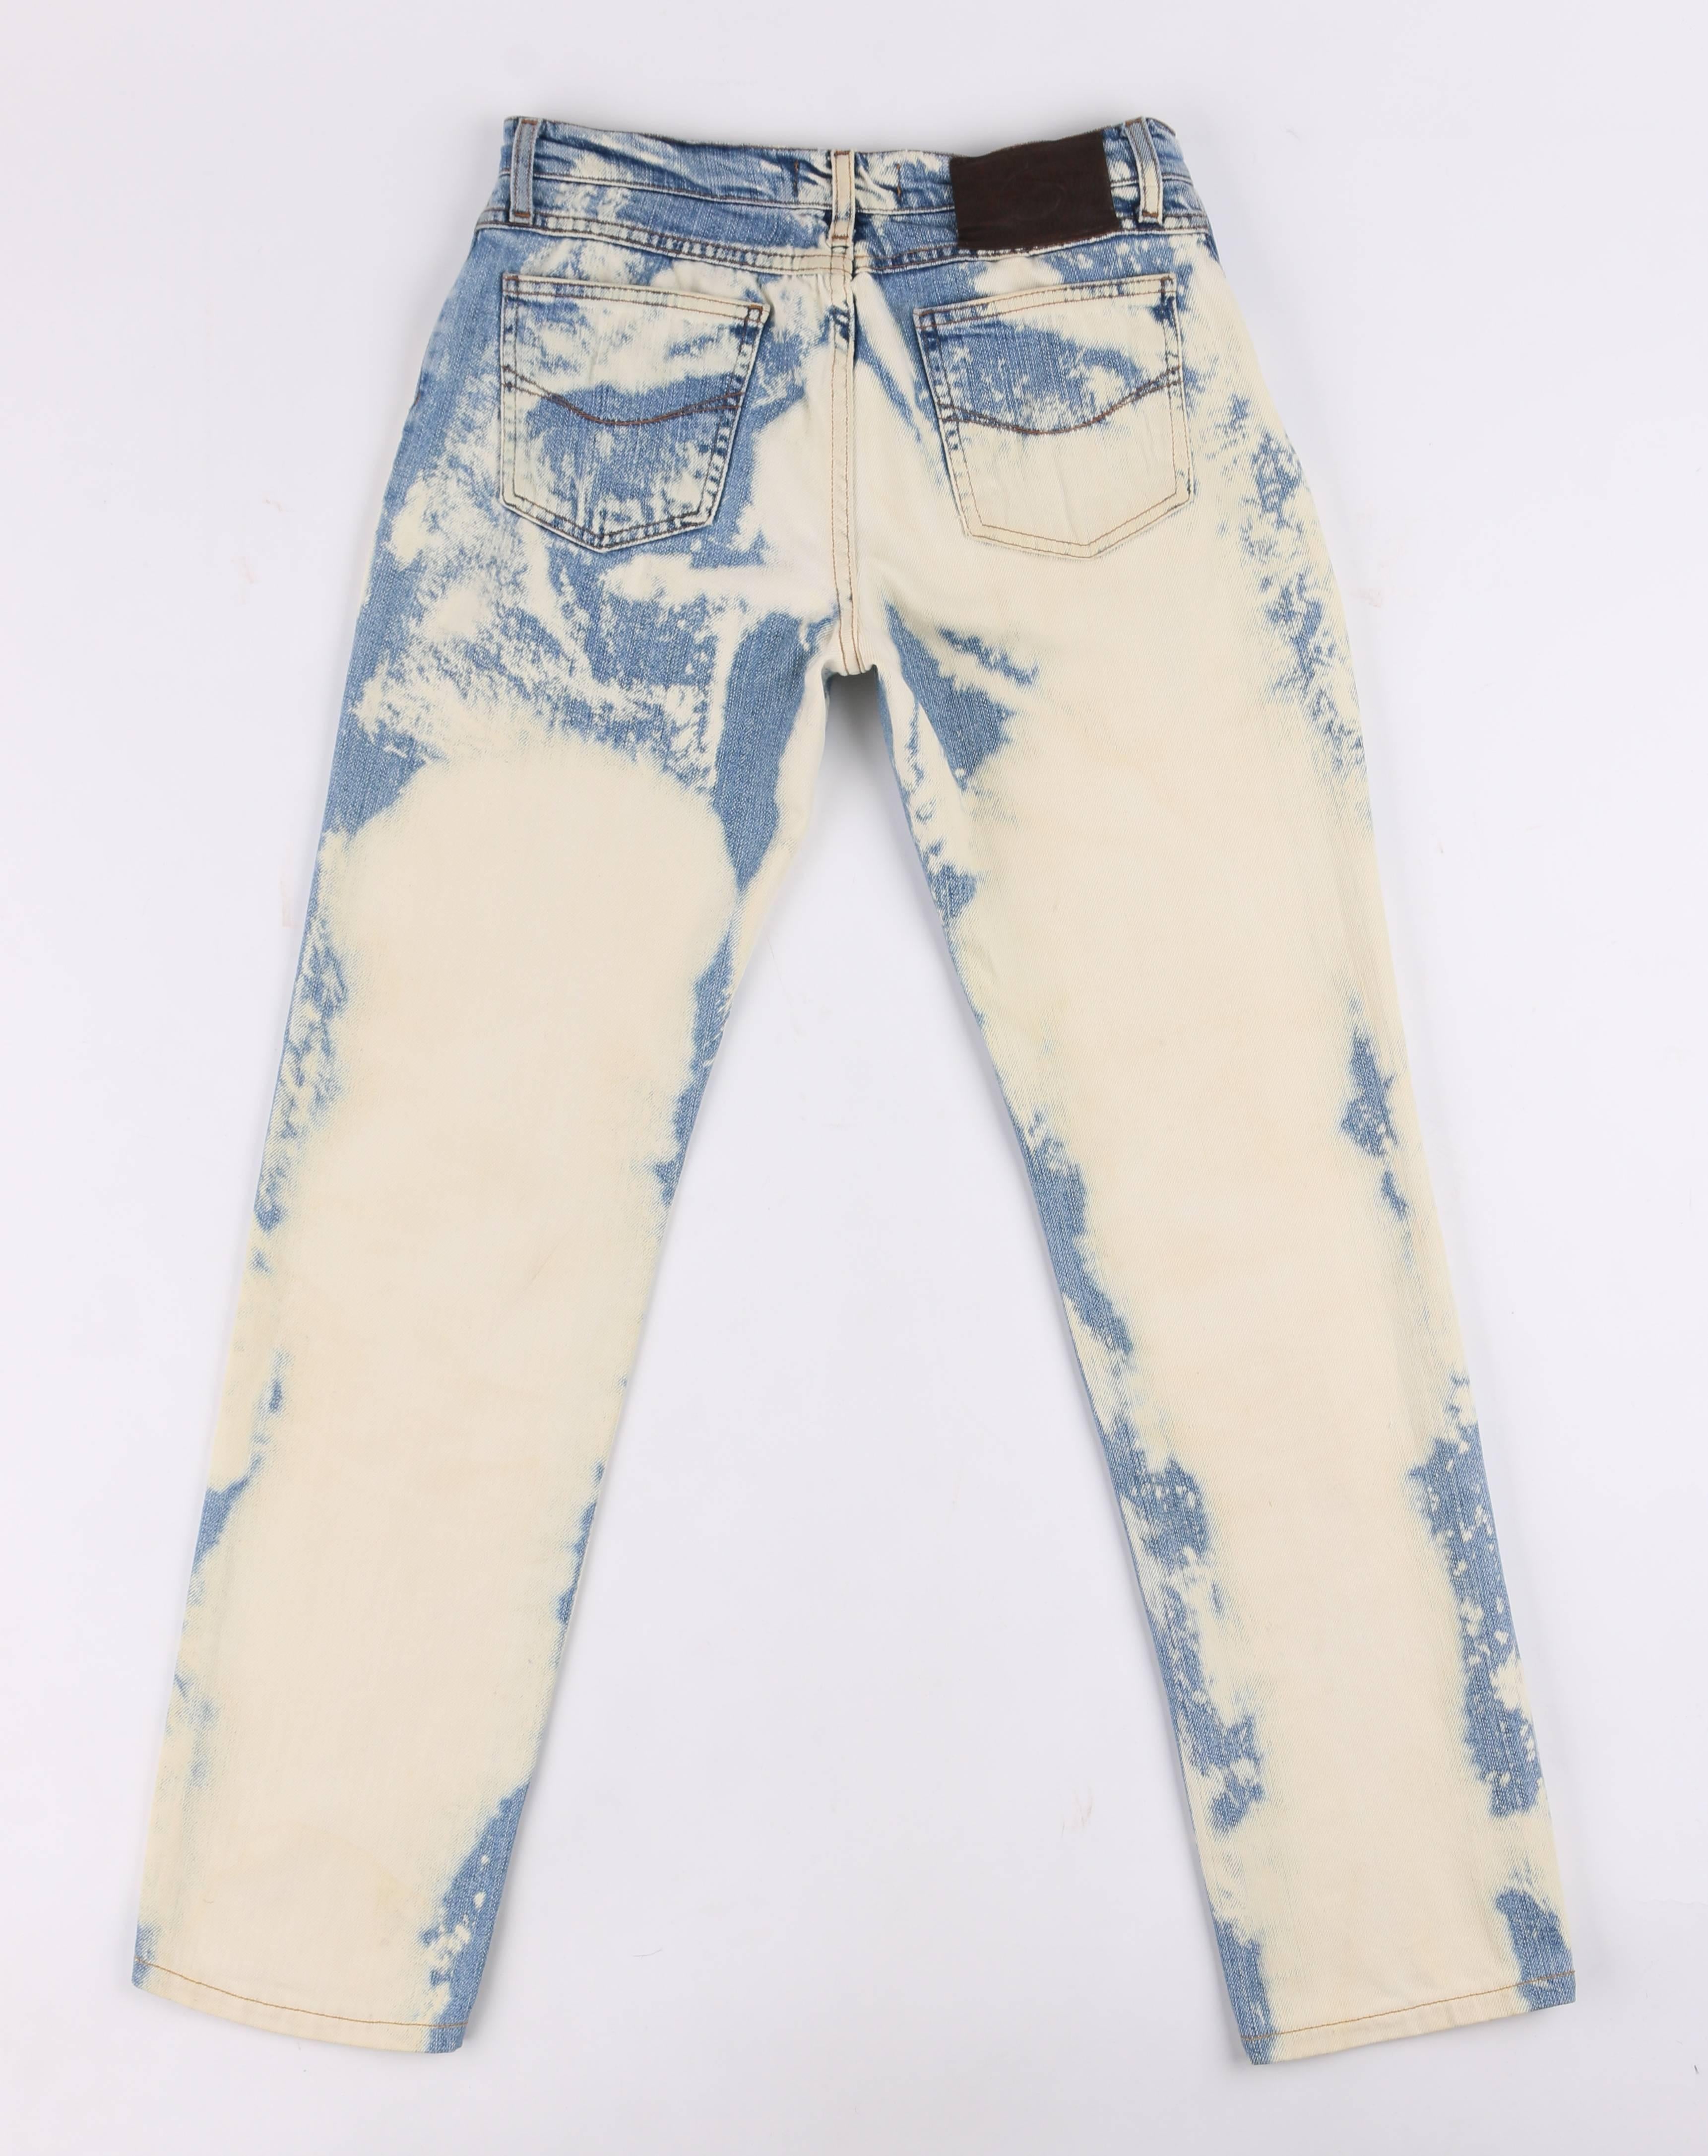 Extremely rare early 1998's Romeo Gigli bleach/acid wash mid-rise straight leg jeans. Classic five pocket design. Center front zip fly with silver 